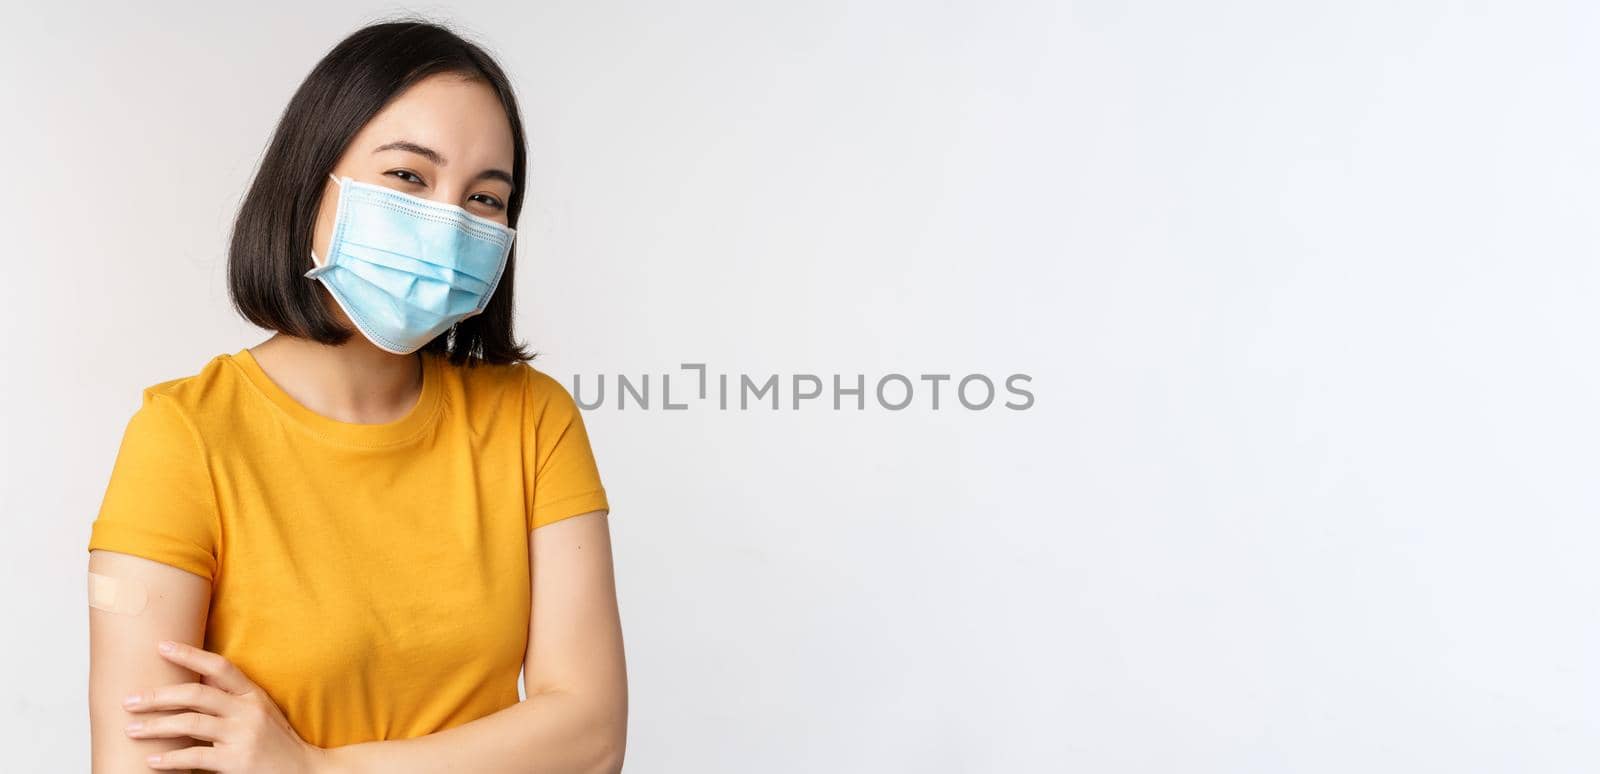 Covid-19, vaccination and healthcare concept. Cute asian girl in medical face mask, holding shoulder with band aid, got vaccine from coronavirus, smiling pleased, white background.